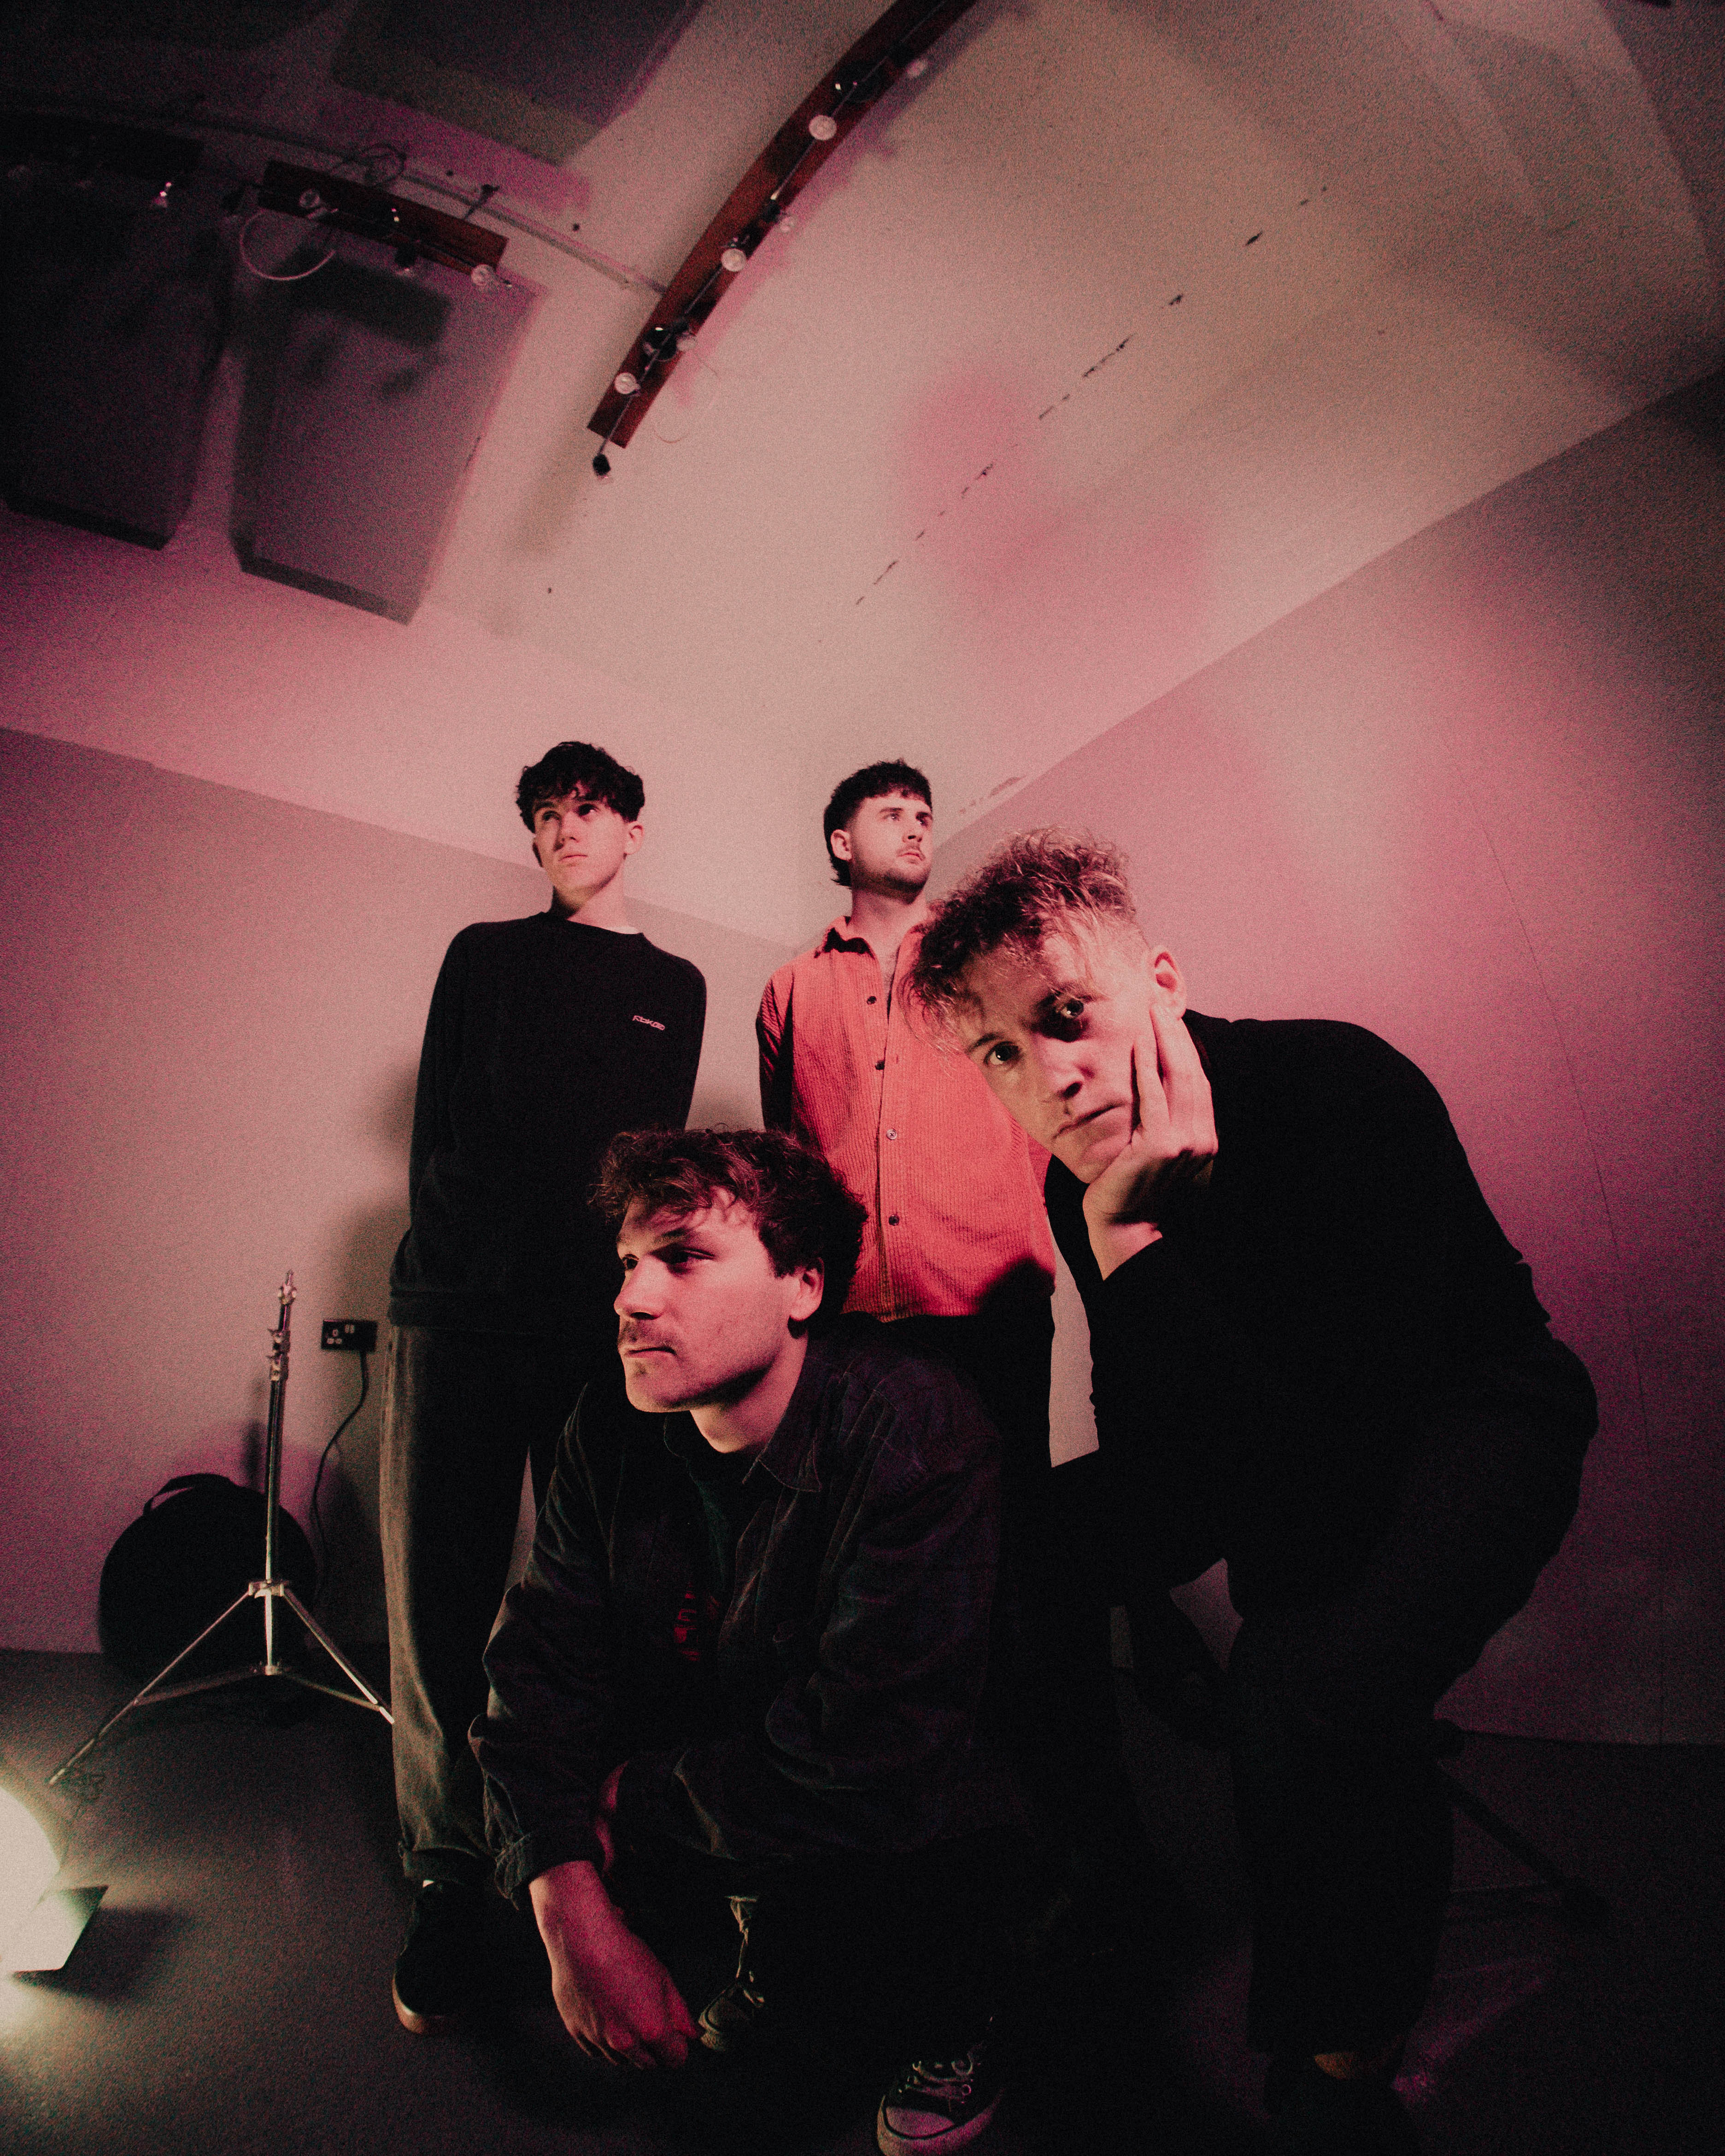 Matt Donnelly of Bristol Indie Band Chasing Kites Discusses Writing Personal and Autobiographical Music, Working with Bring Me the Horizon Producer Sam Winfield, How Evolving from a Solo Project to a Full Band Changed Their Sound and More